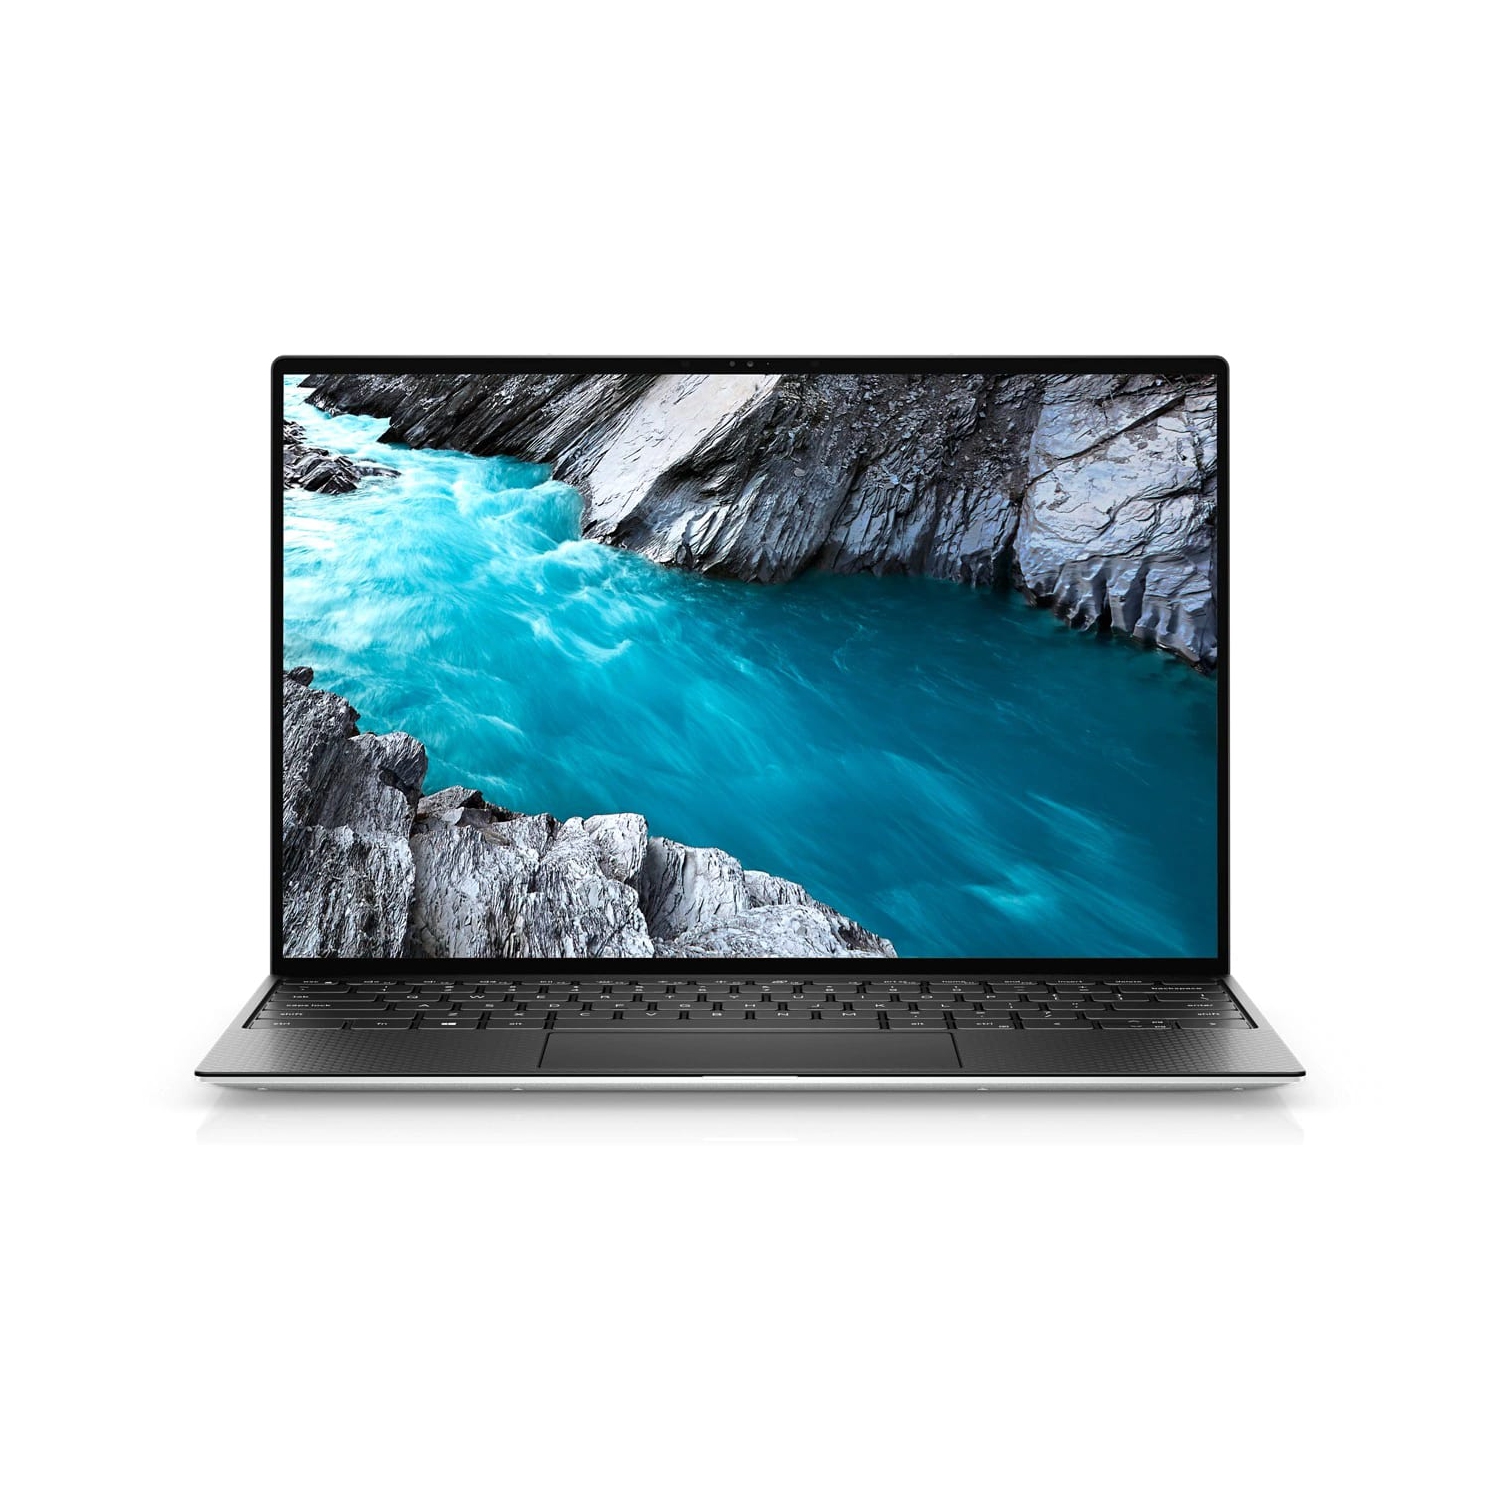 Refurbished (Excellent) - Dell XPS 13 9310 Laptop (2020) | 13.4" 4K Touch | Core i7 - 512GB SSD - 16GB RAM | 4 Cores @ 4.4 GHz - 11th Gen CPU Certified Refurbished